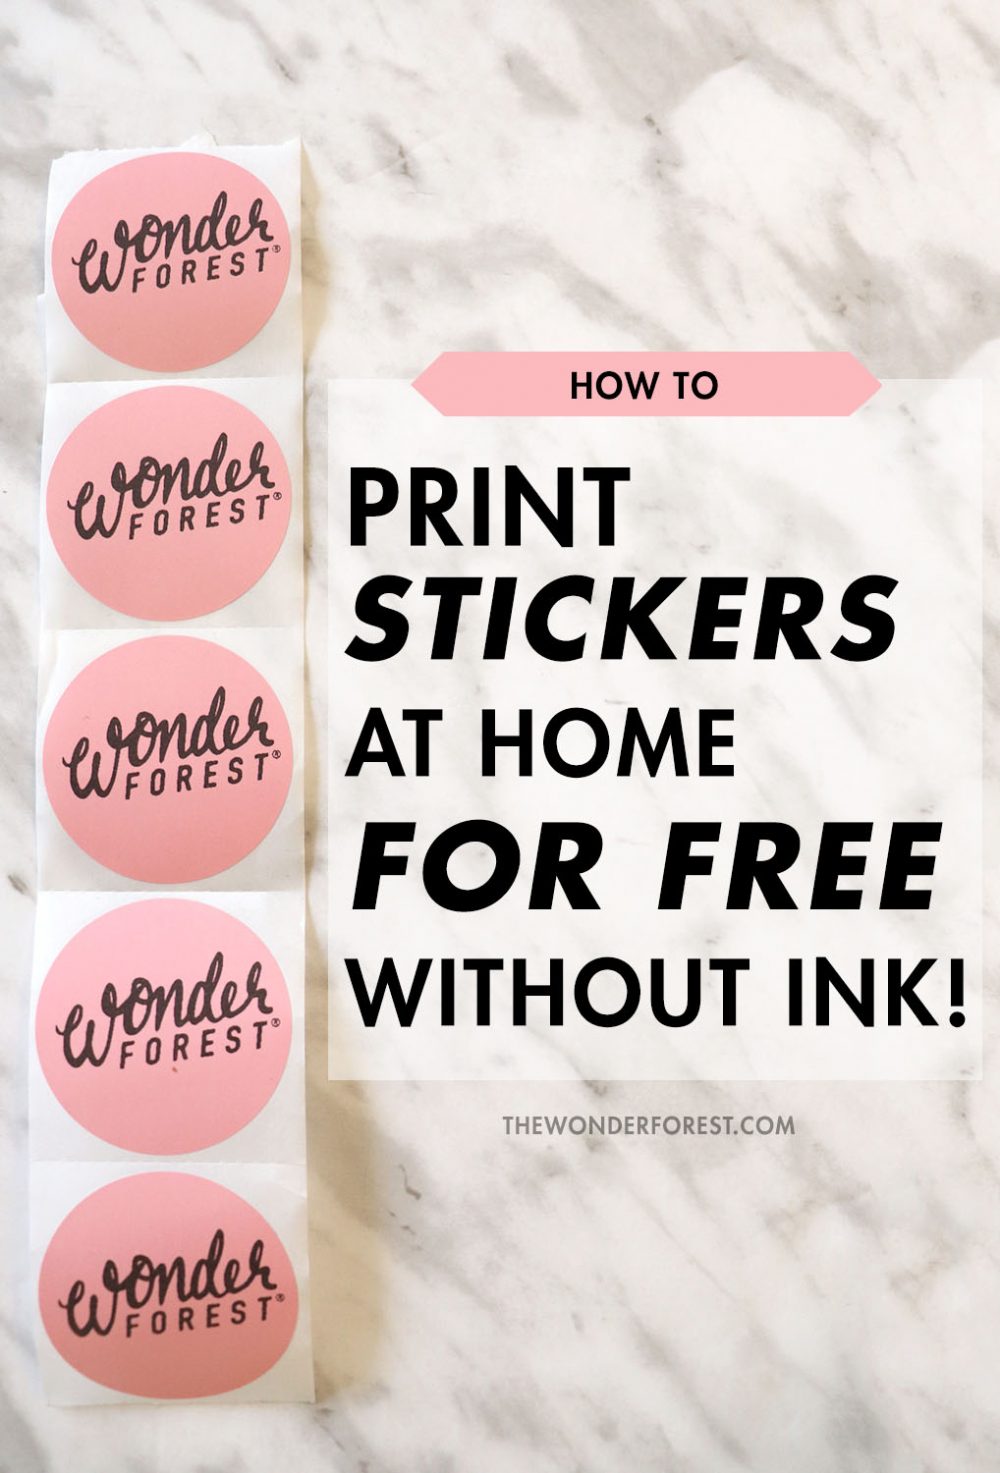 How To Print Stickers At Home For Free - Without Ink! Wonder Forest